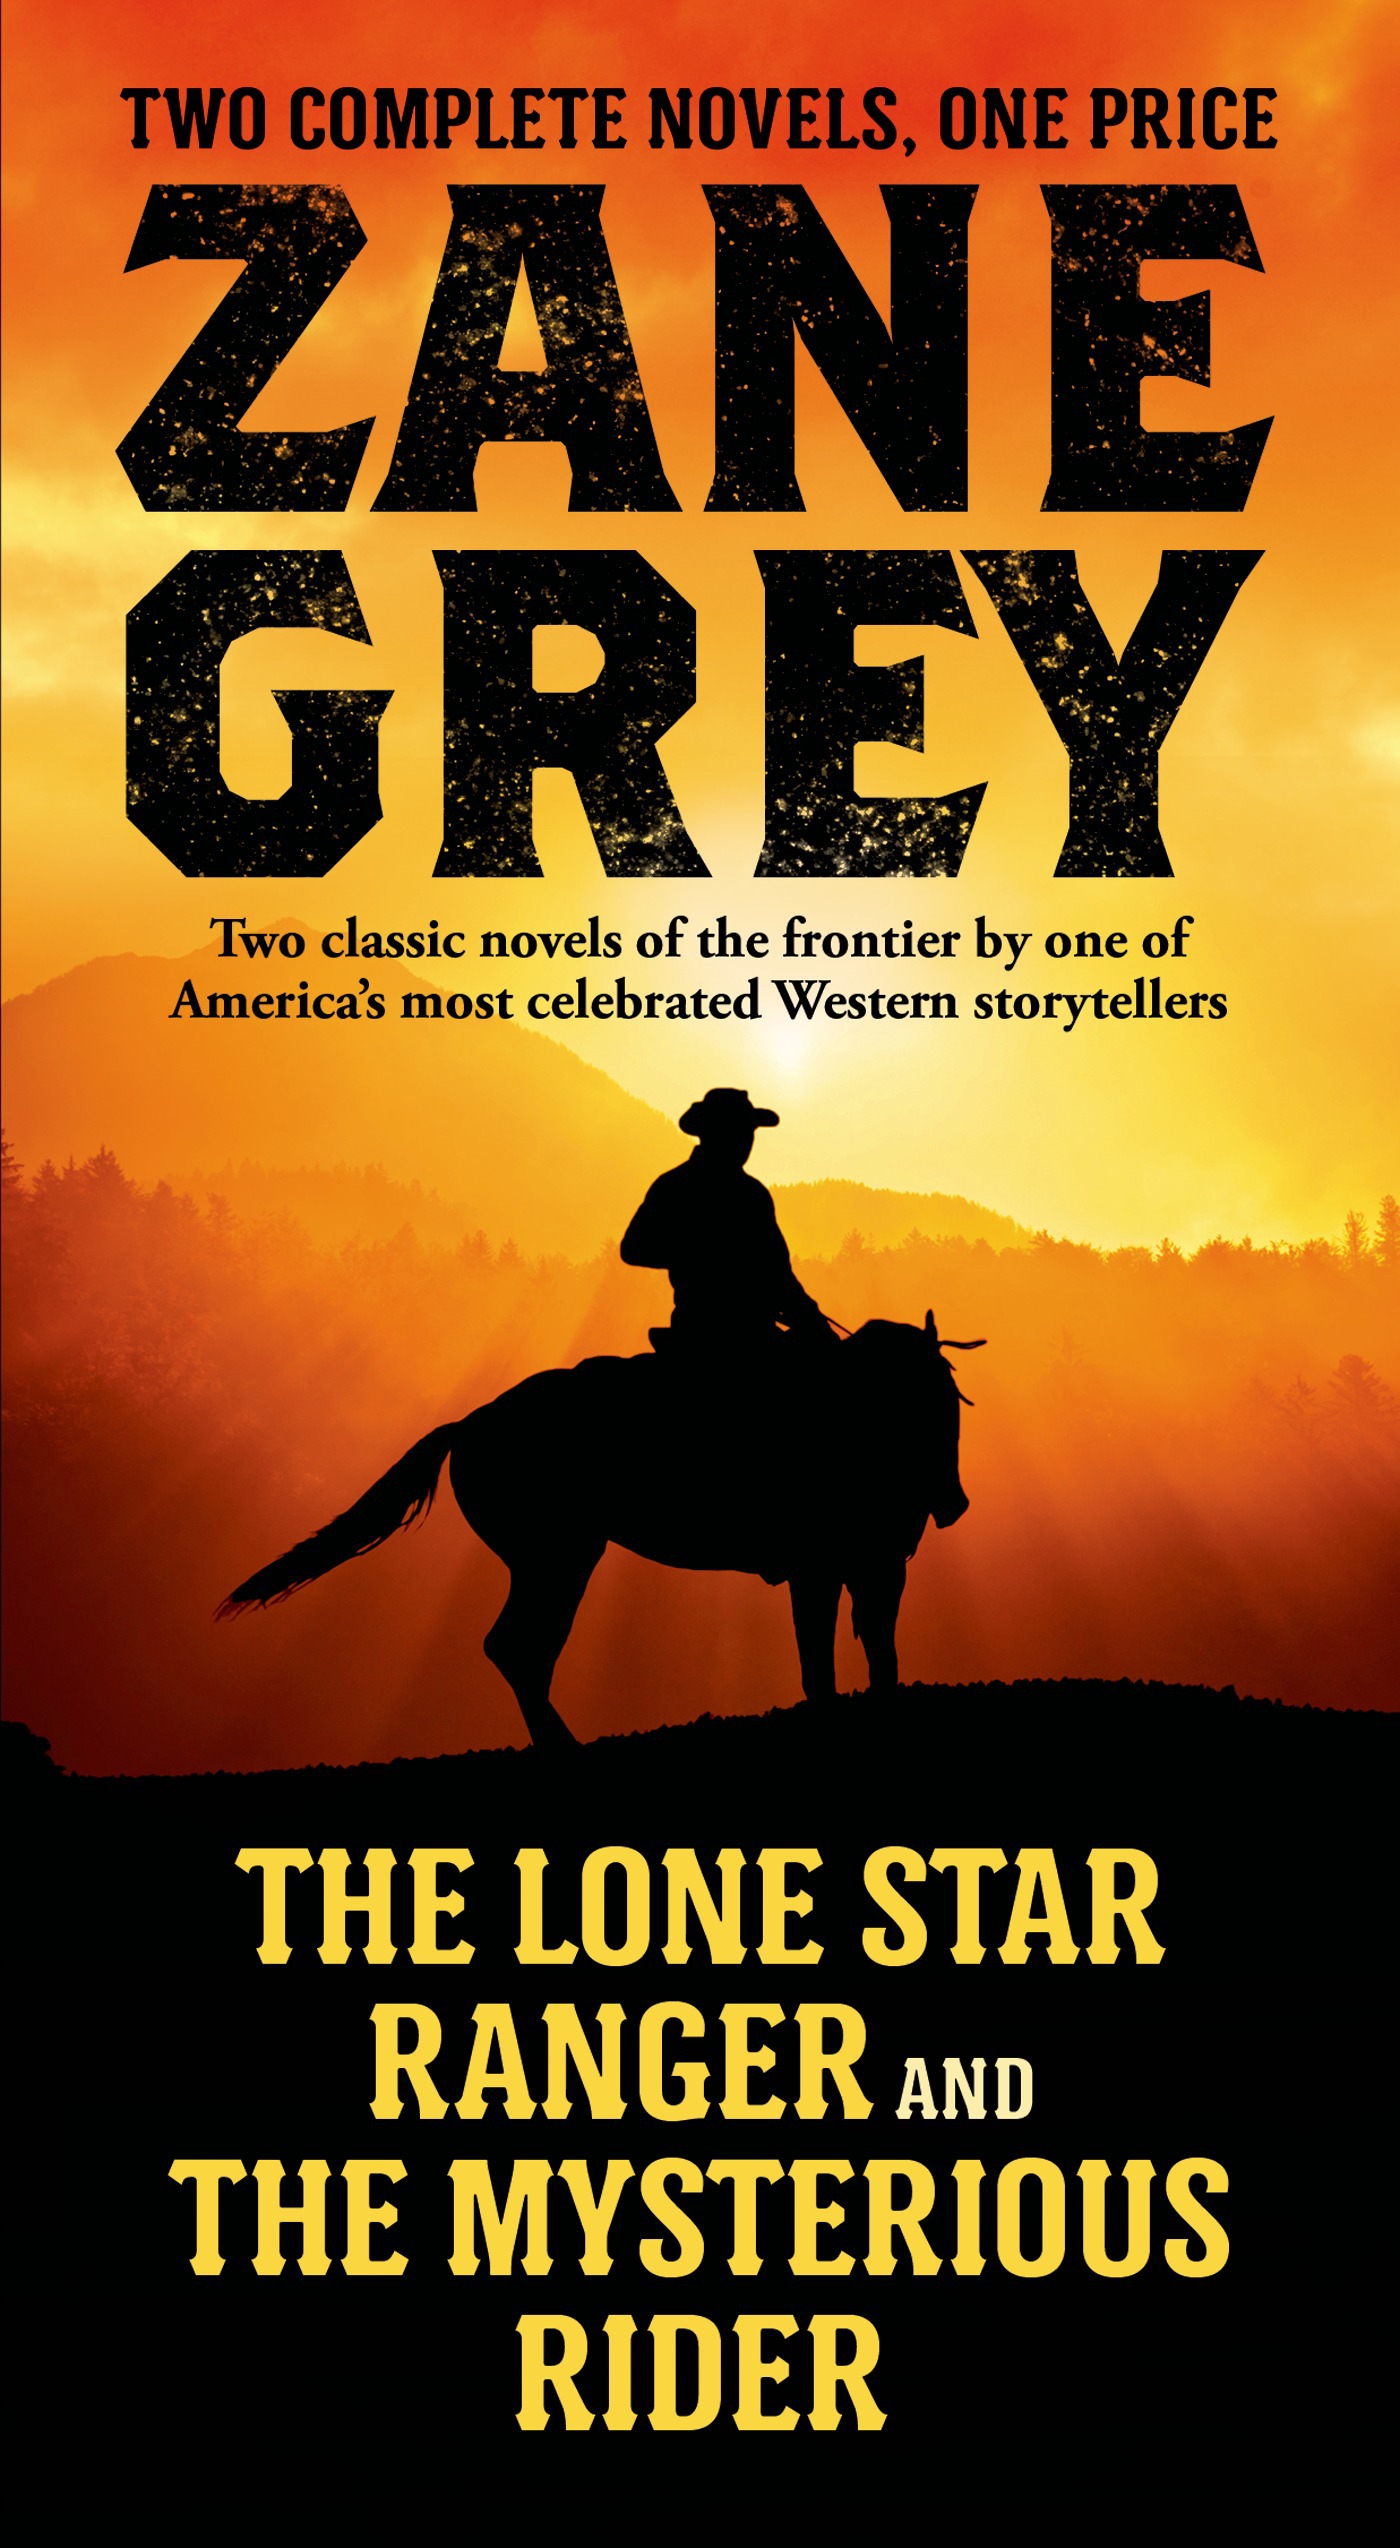 The Lone Star Ranger and The Mysterious Rider : Two Classic Novels of the Frontier by Zane Grey